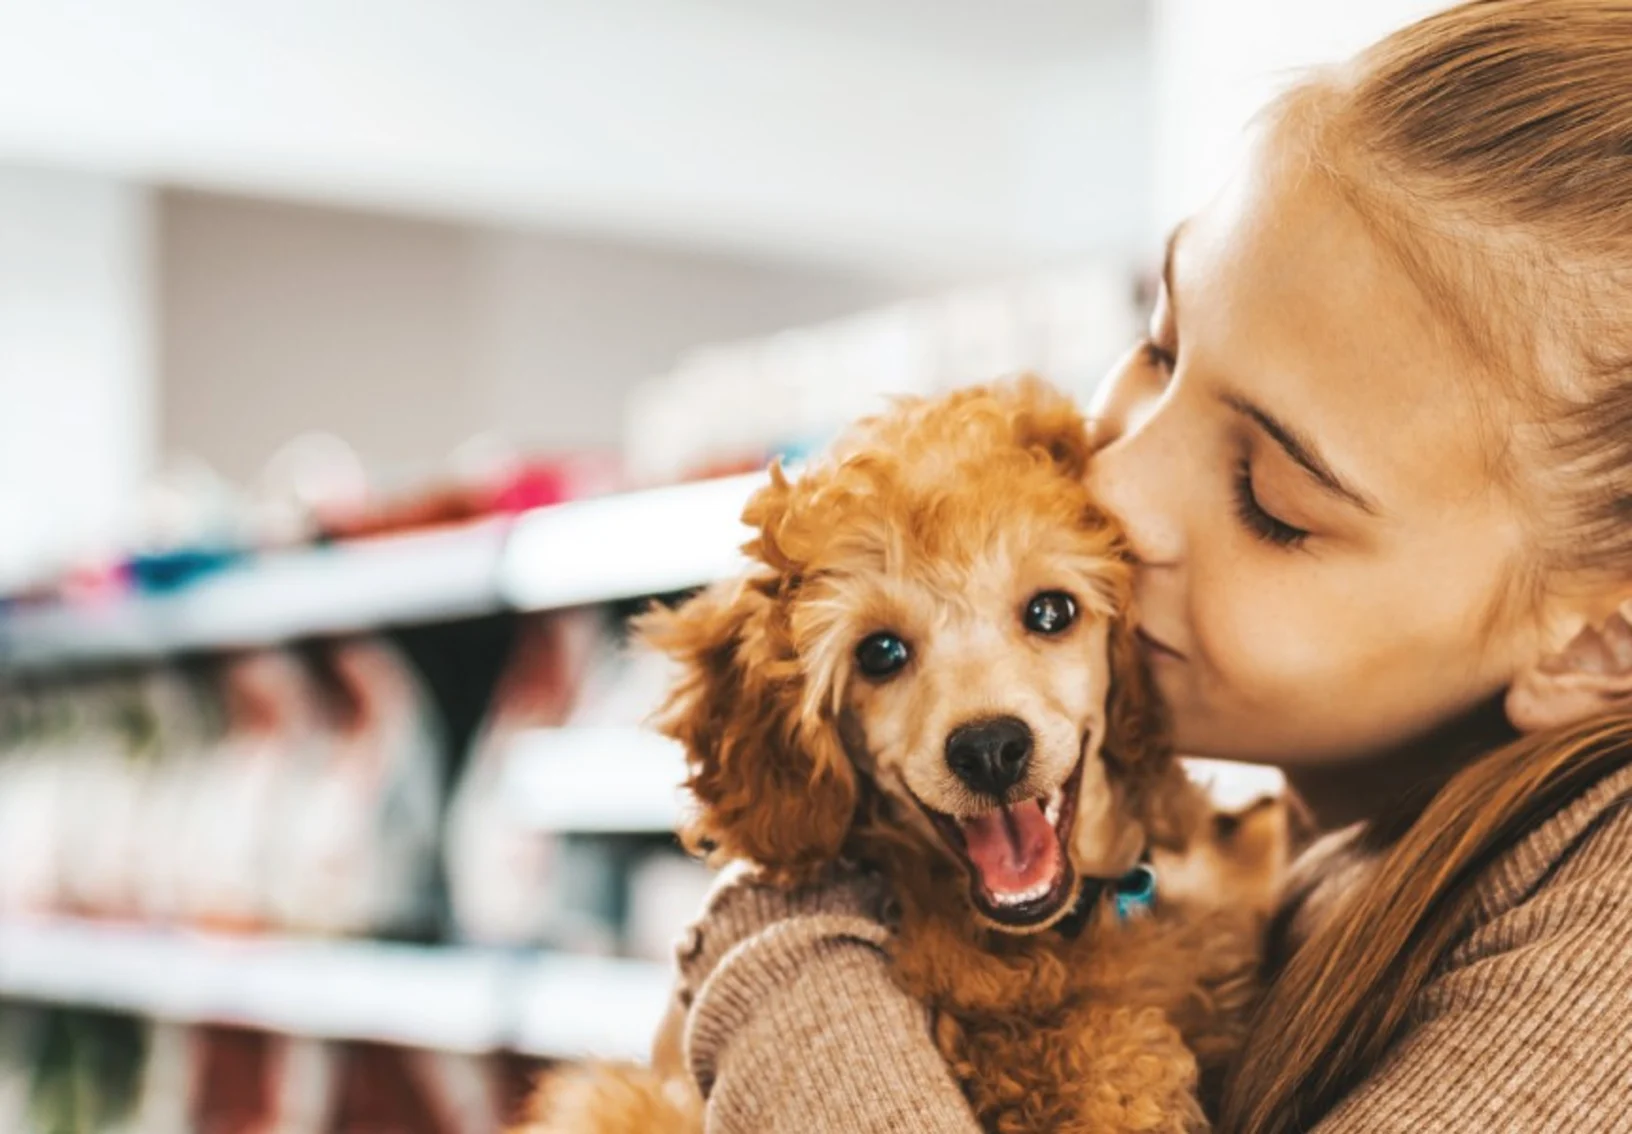 Girl holding and kissing a small dog while in a store